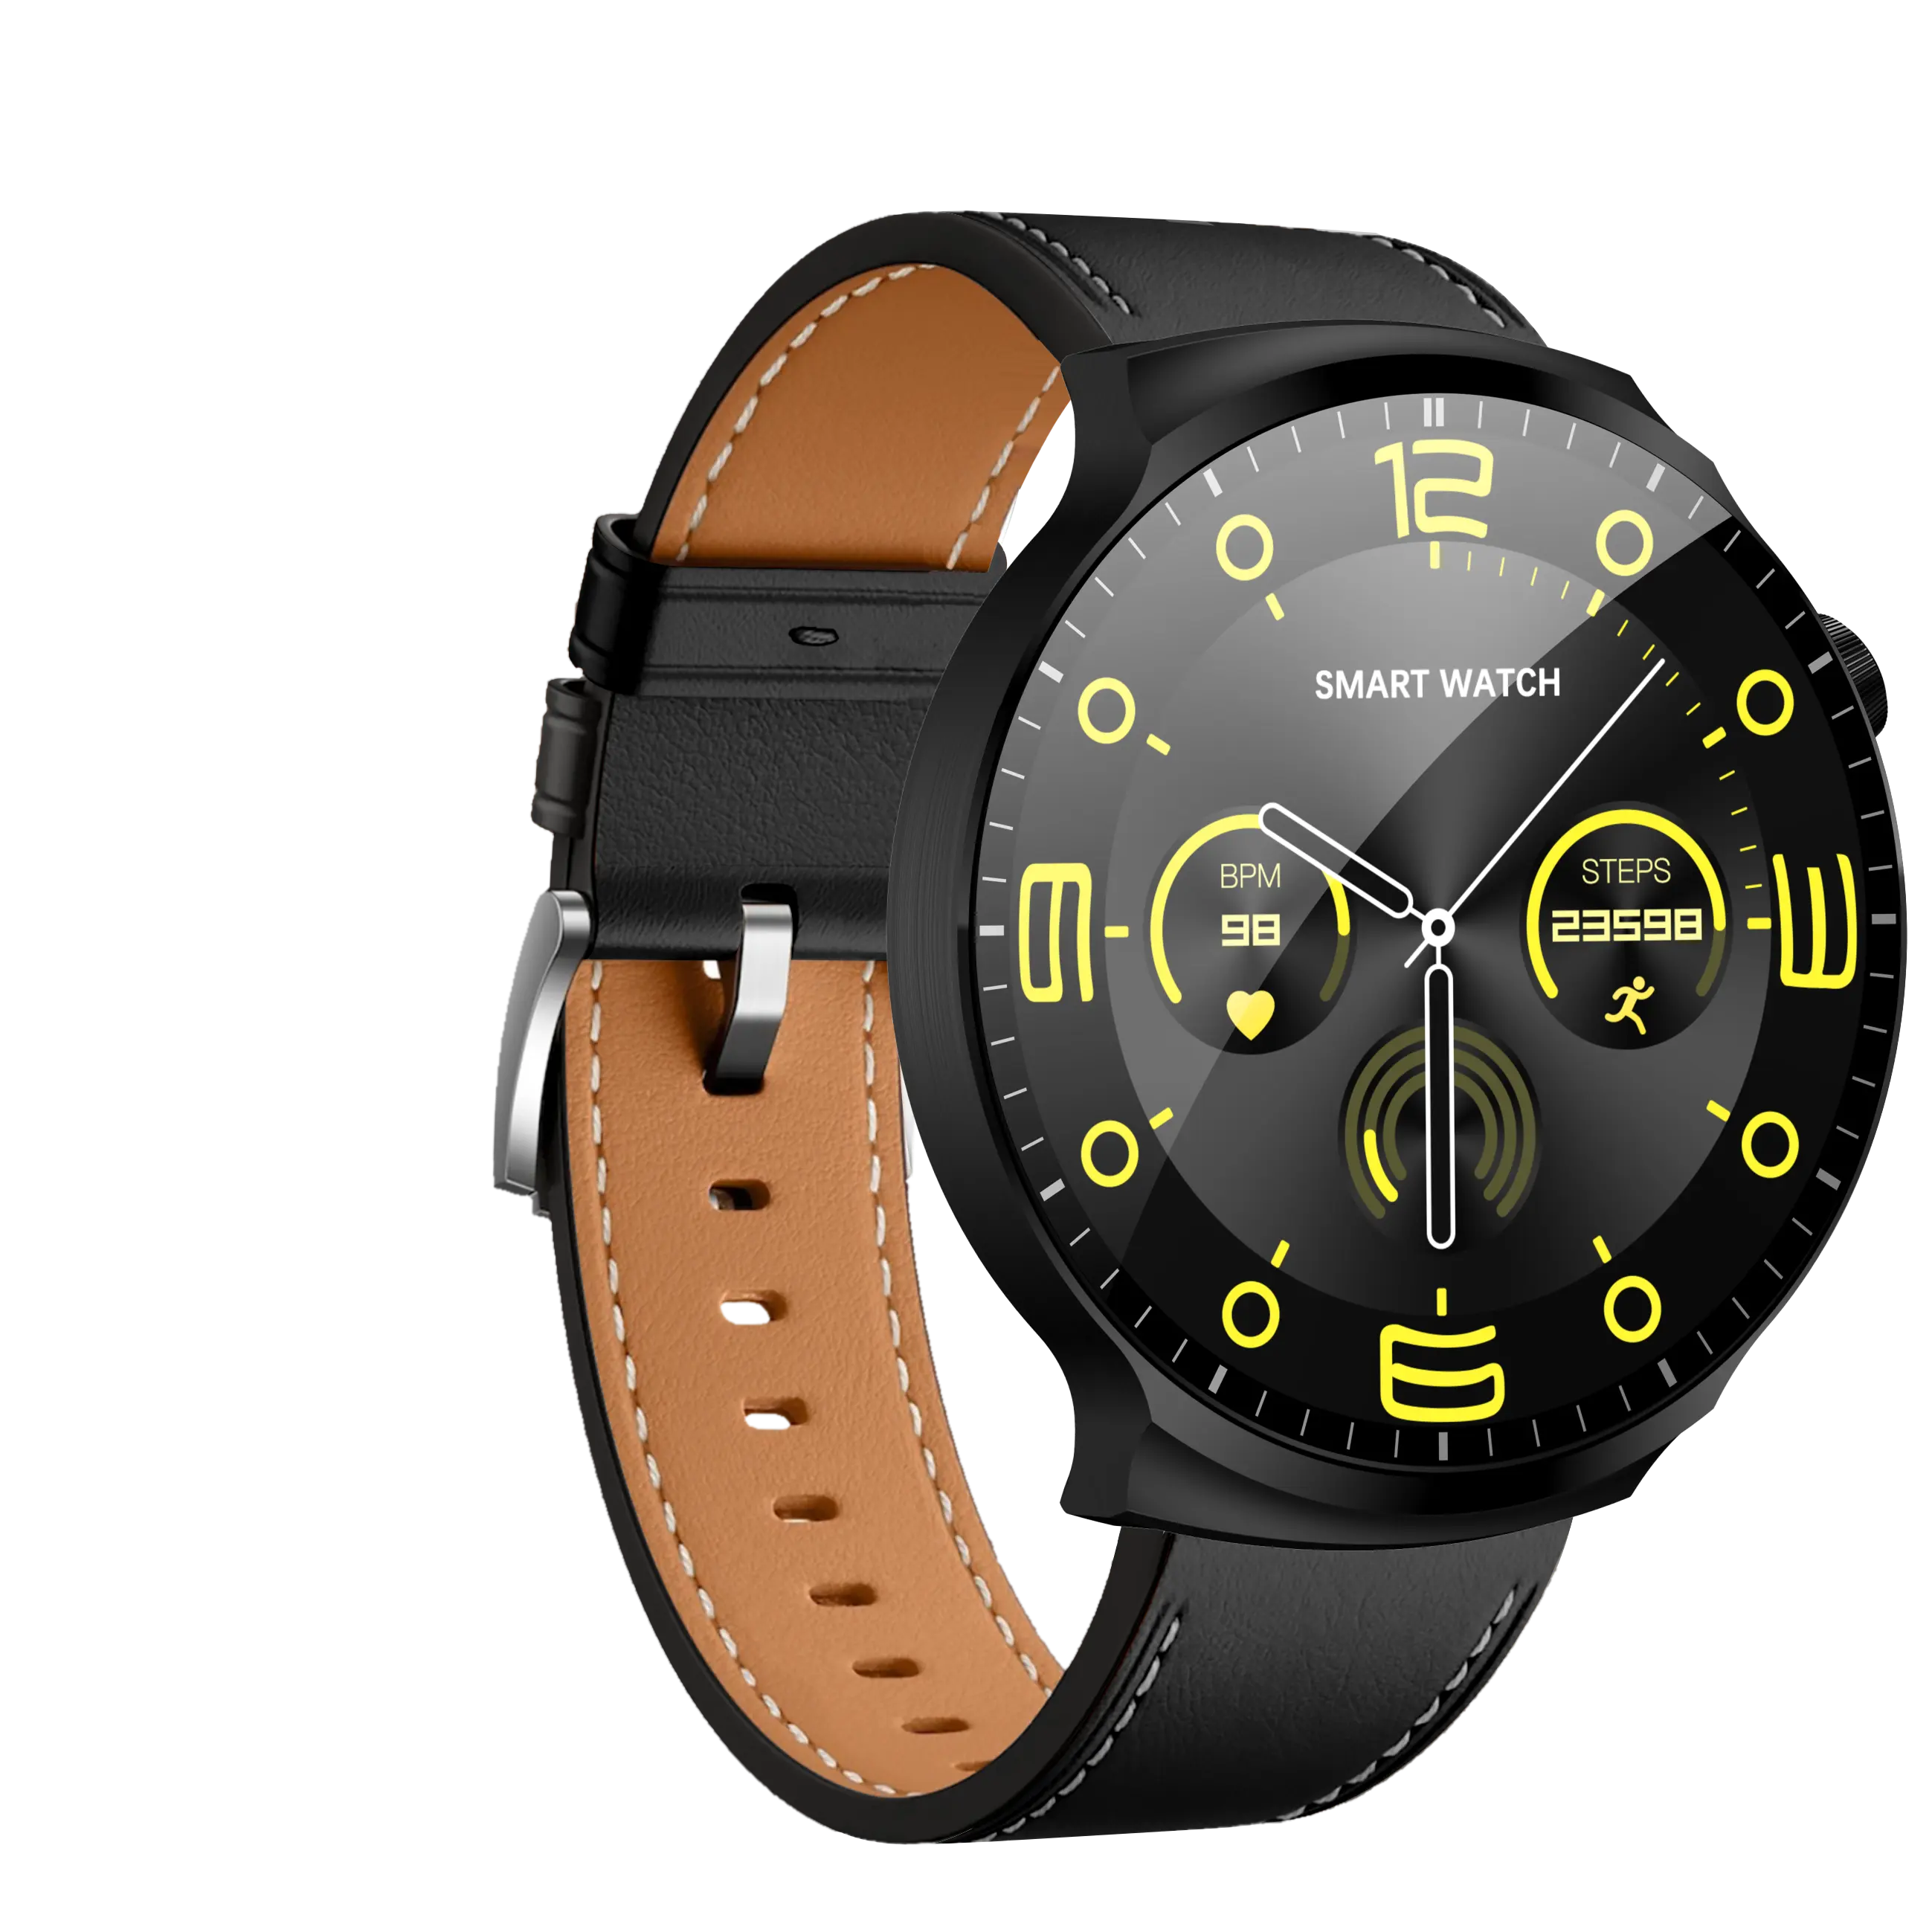 Fully unlocked genuine smartwatch with global positioning system, suitable for Android and other watch series, S80max